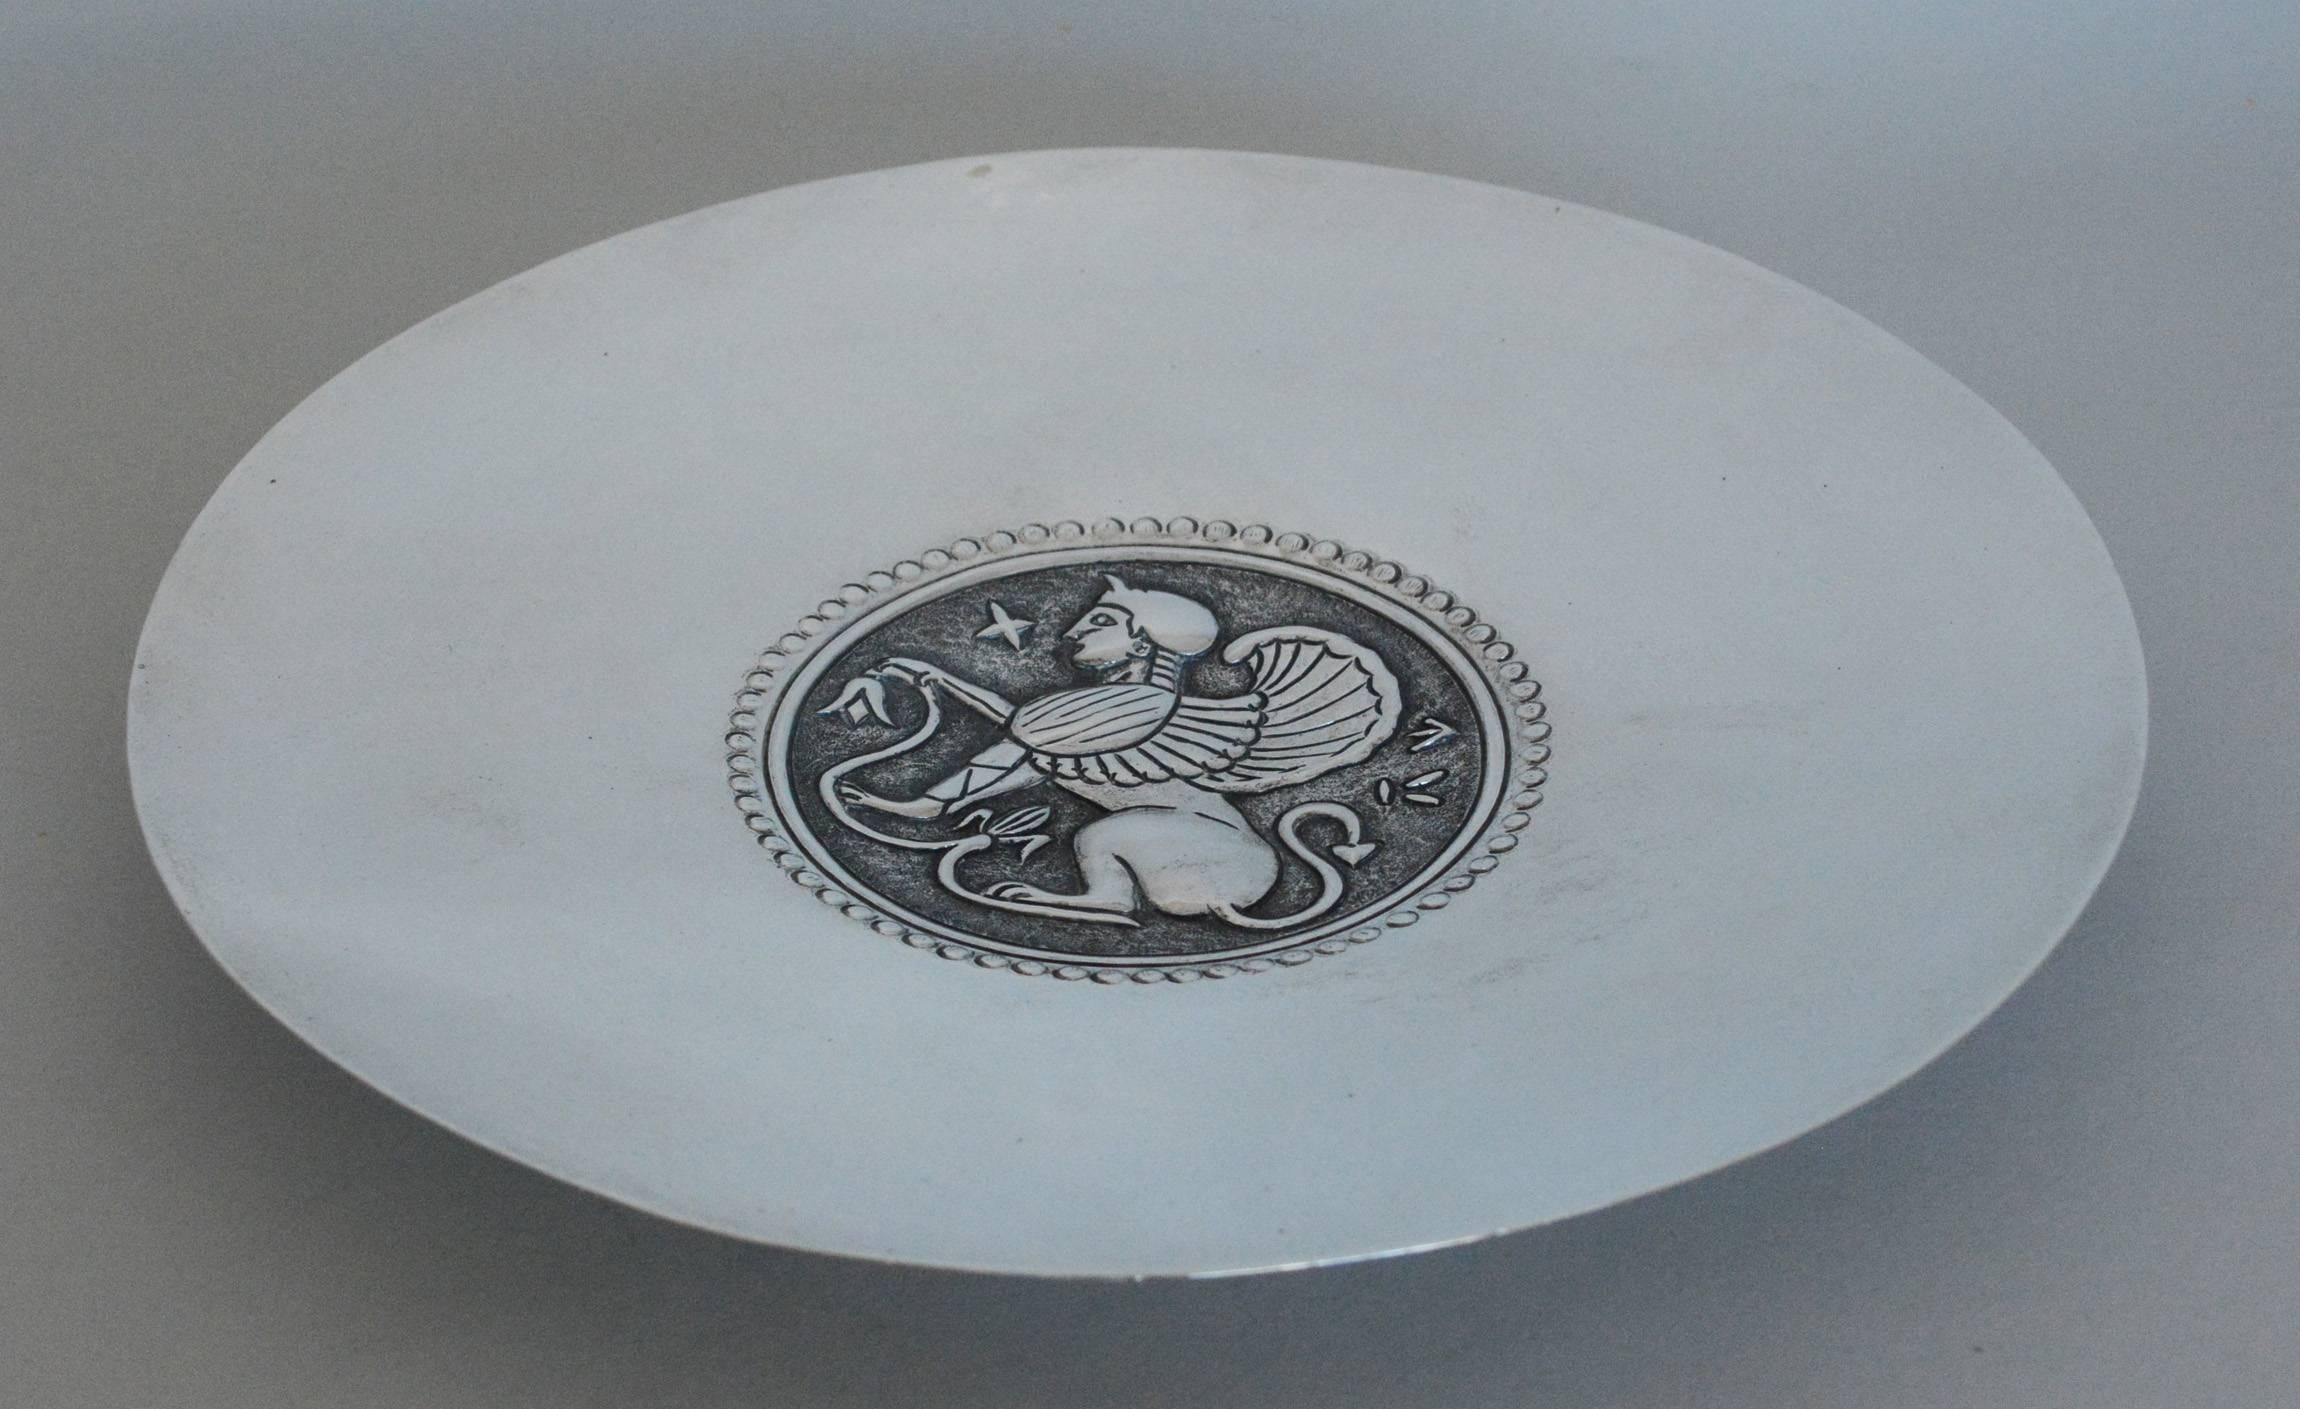 830 sliver dish by renowned jeweler and silversmith G. Stephanides Son and Company of Cyprus. The motif on this dish is taken from an ancient Cyprus coin.